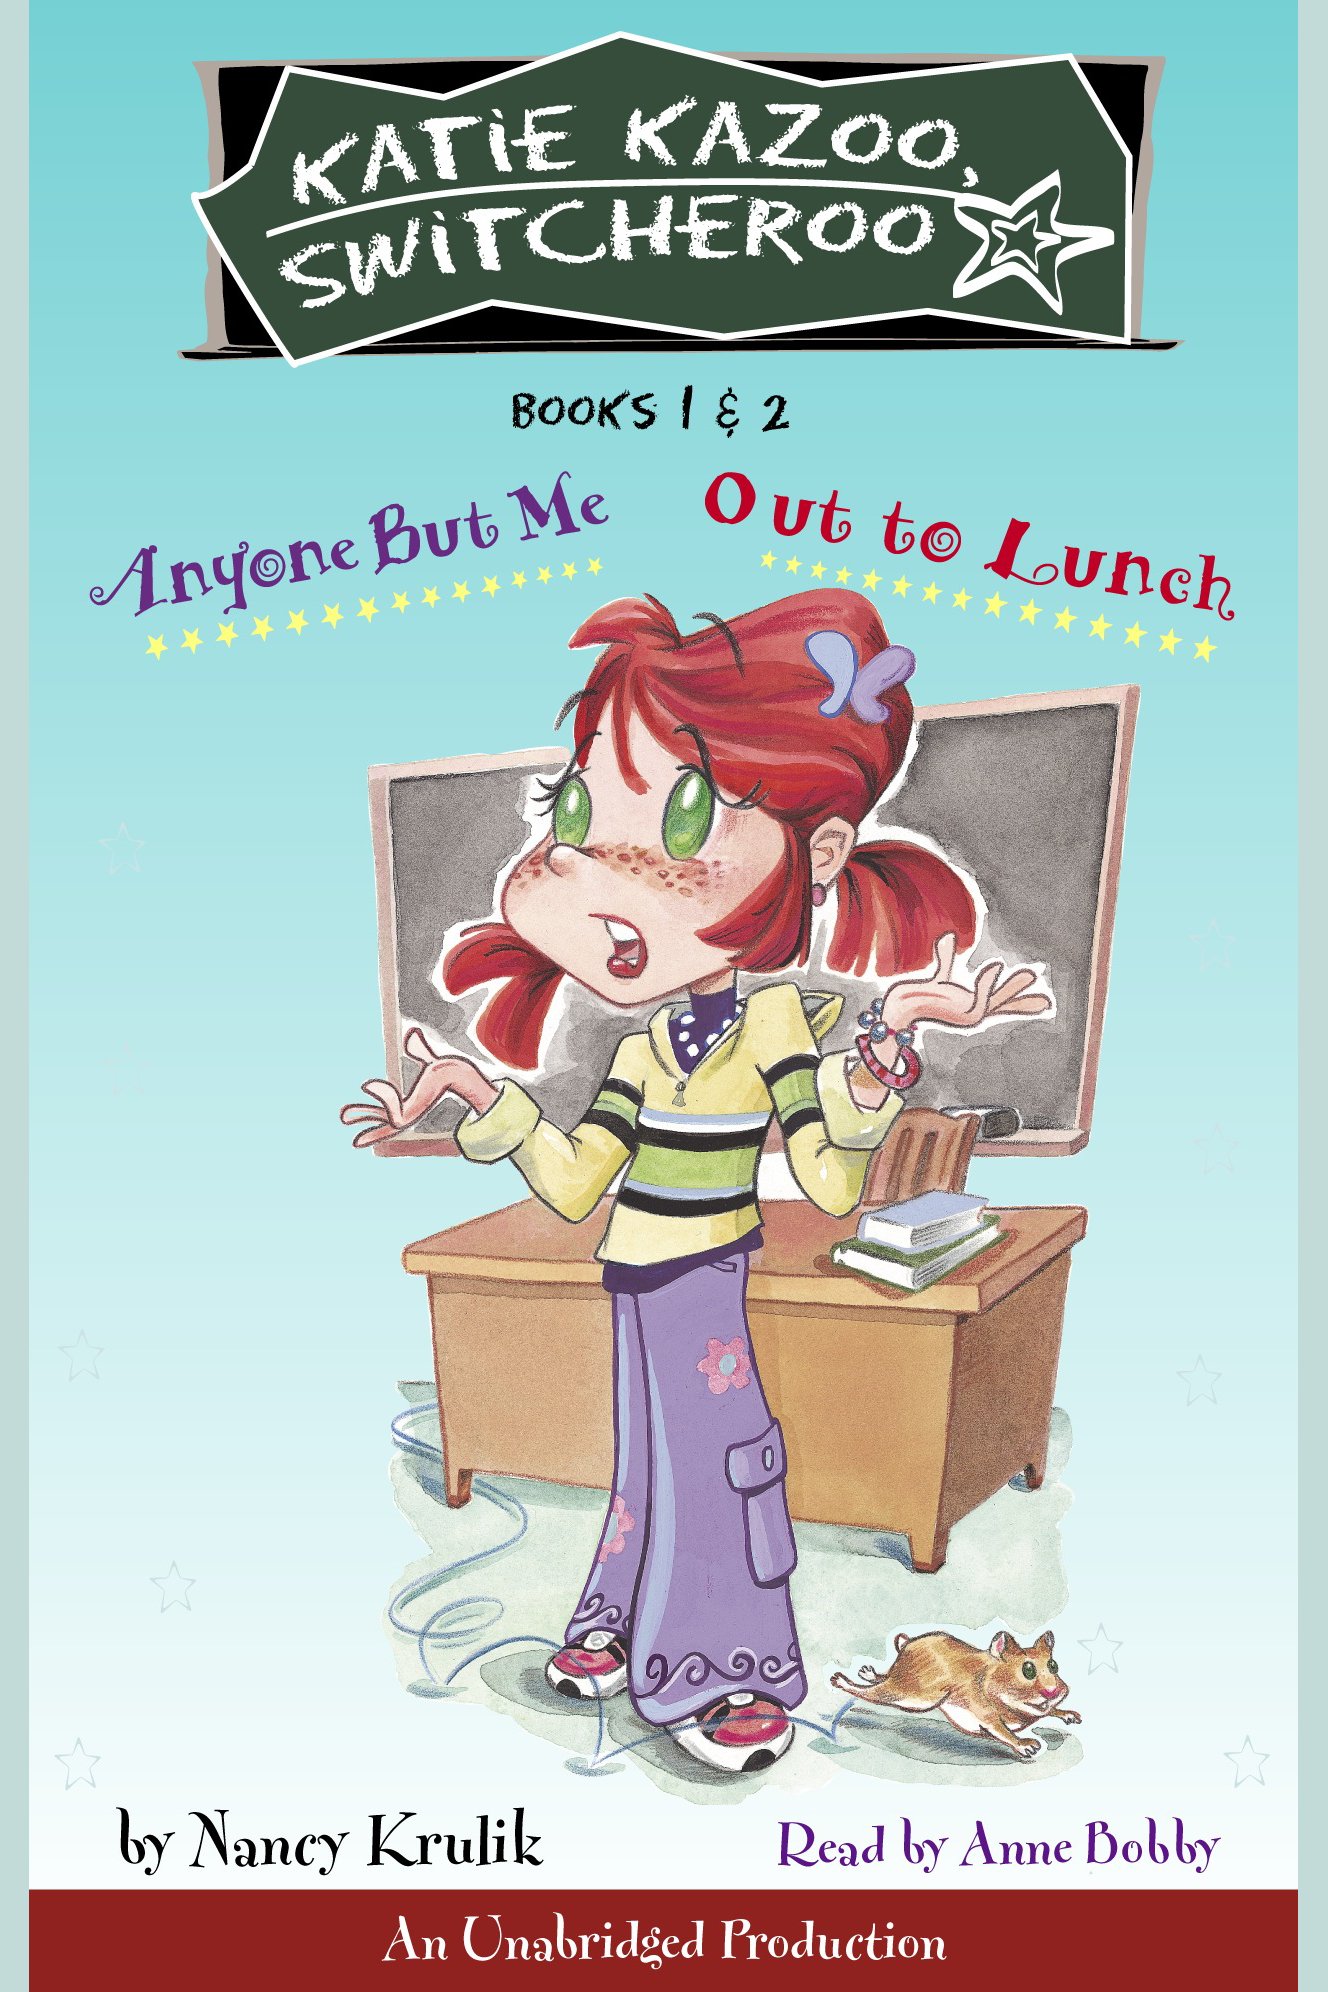 Anyone But Me Out to lunch cover image